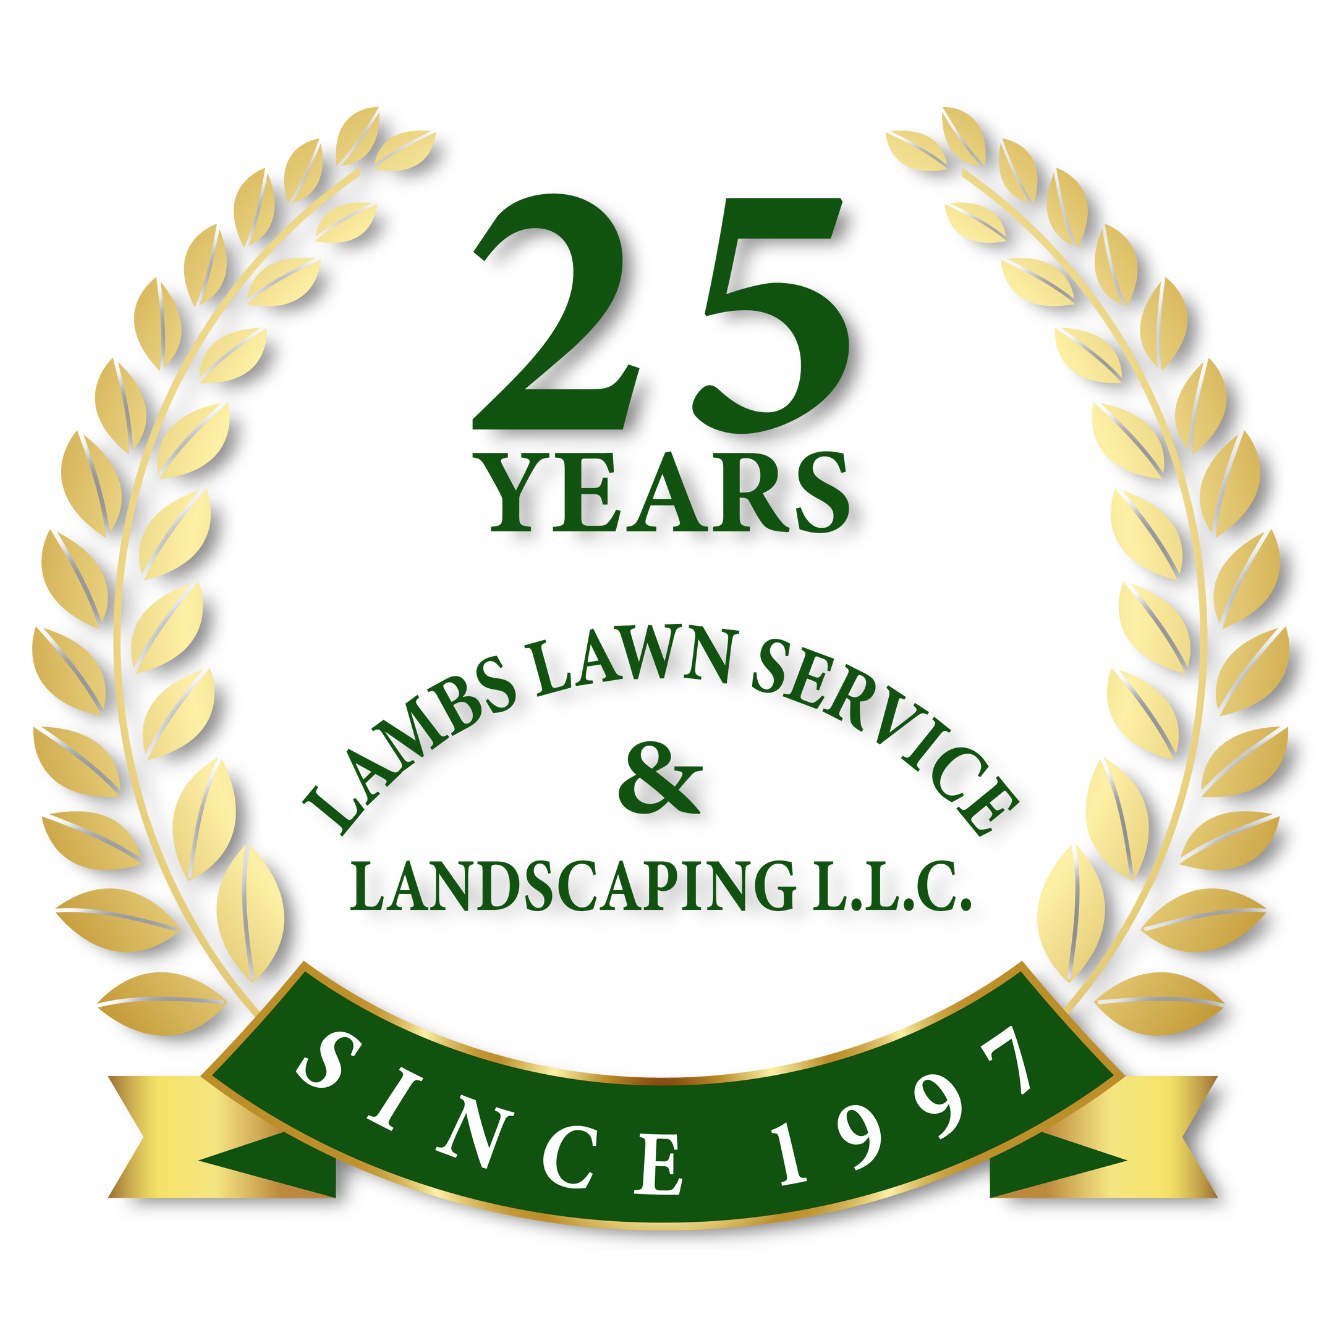 25 Years of Lambs Lawn Service and Landscaping LLC